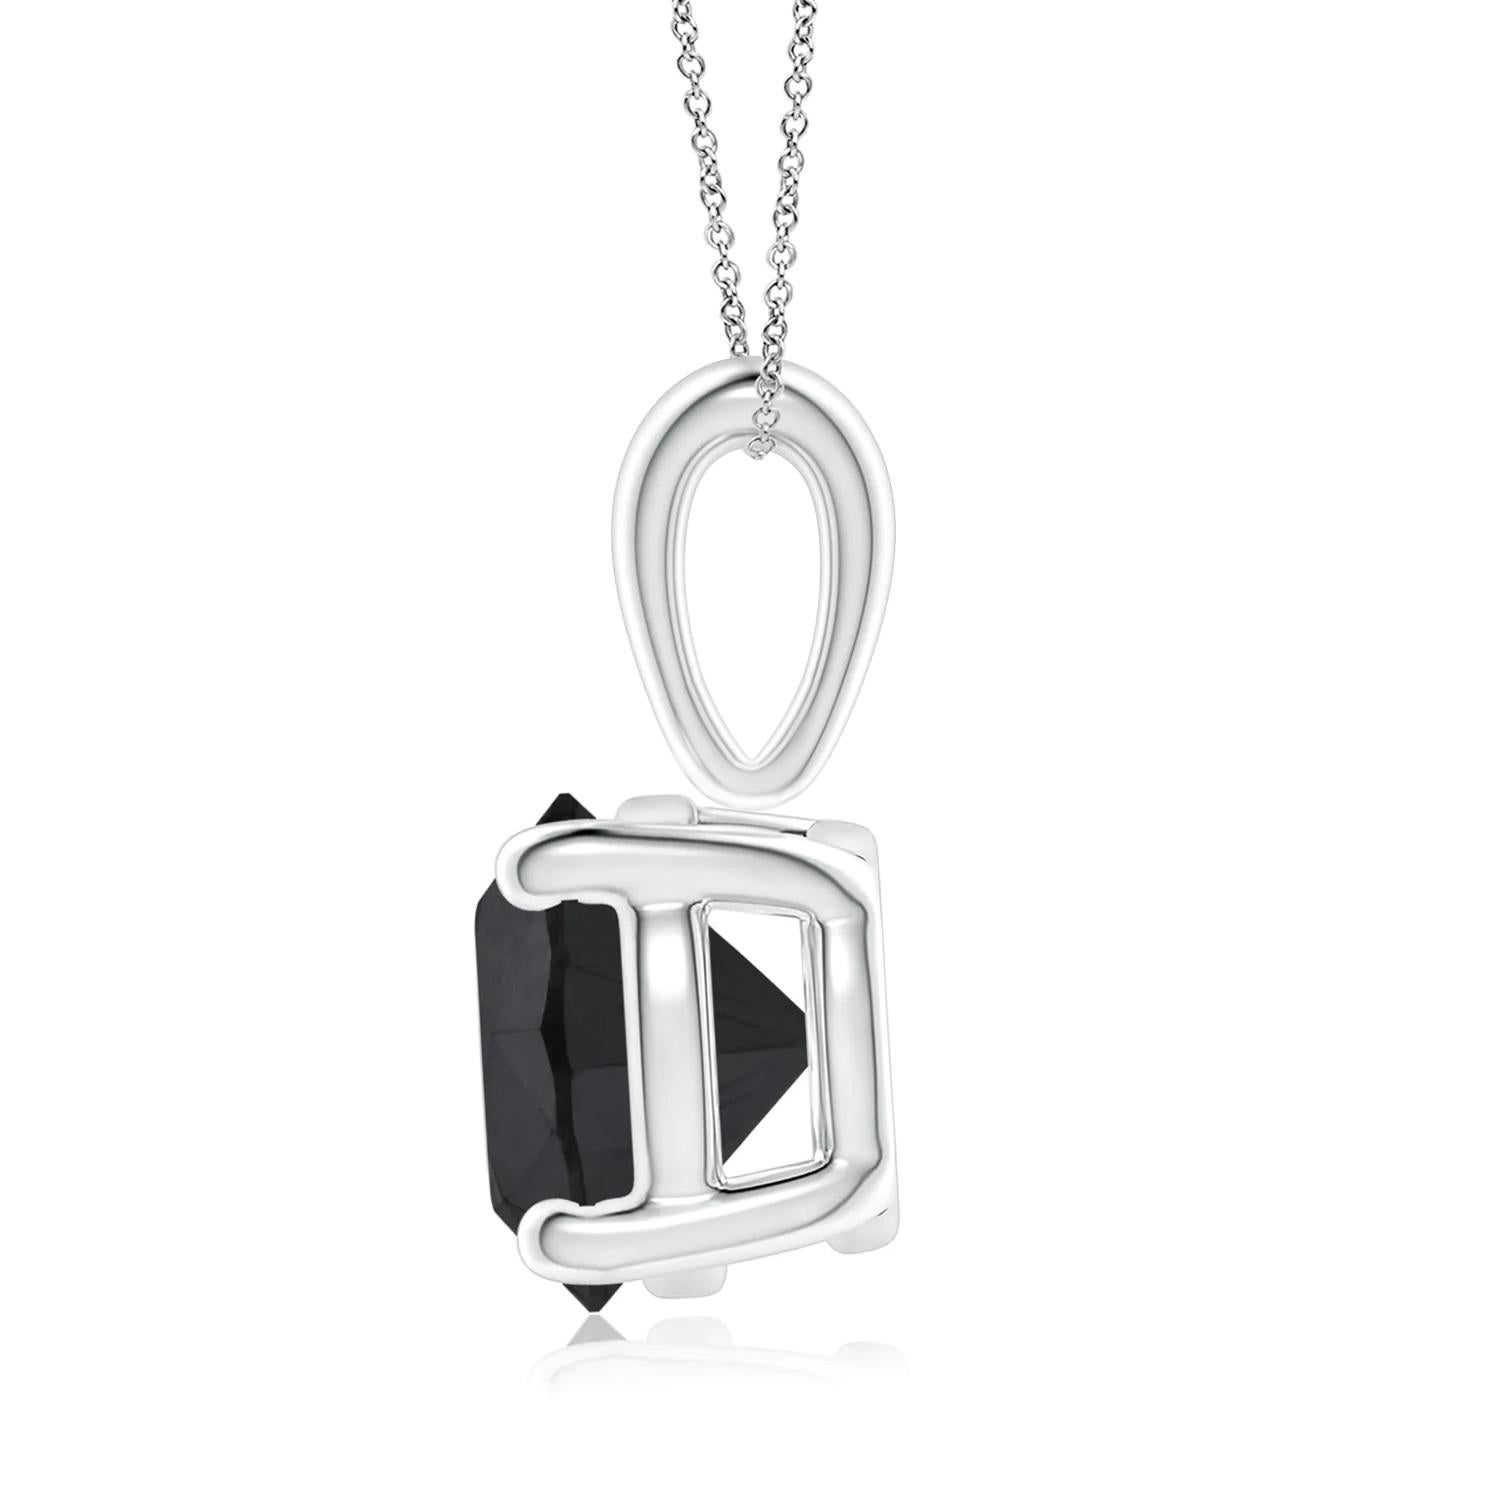 Surprise a special woman in your life with this breathtaking, statement hand crafted solitaire black diamond necklace. This eye-catching pendant necklace features a 1.29 carat round cut black diamond, measuring 6.70 x 6.71 x 4.06 mm set in 14k white